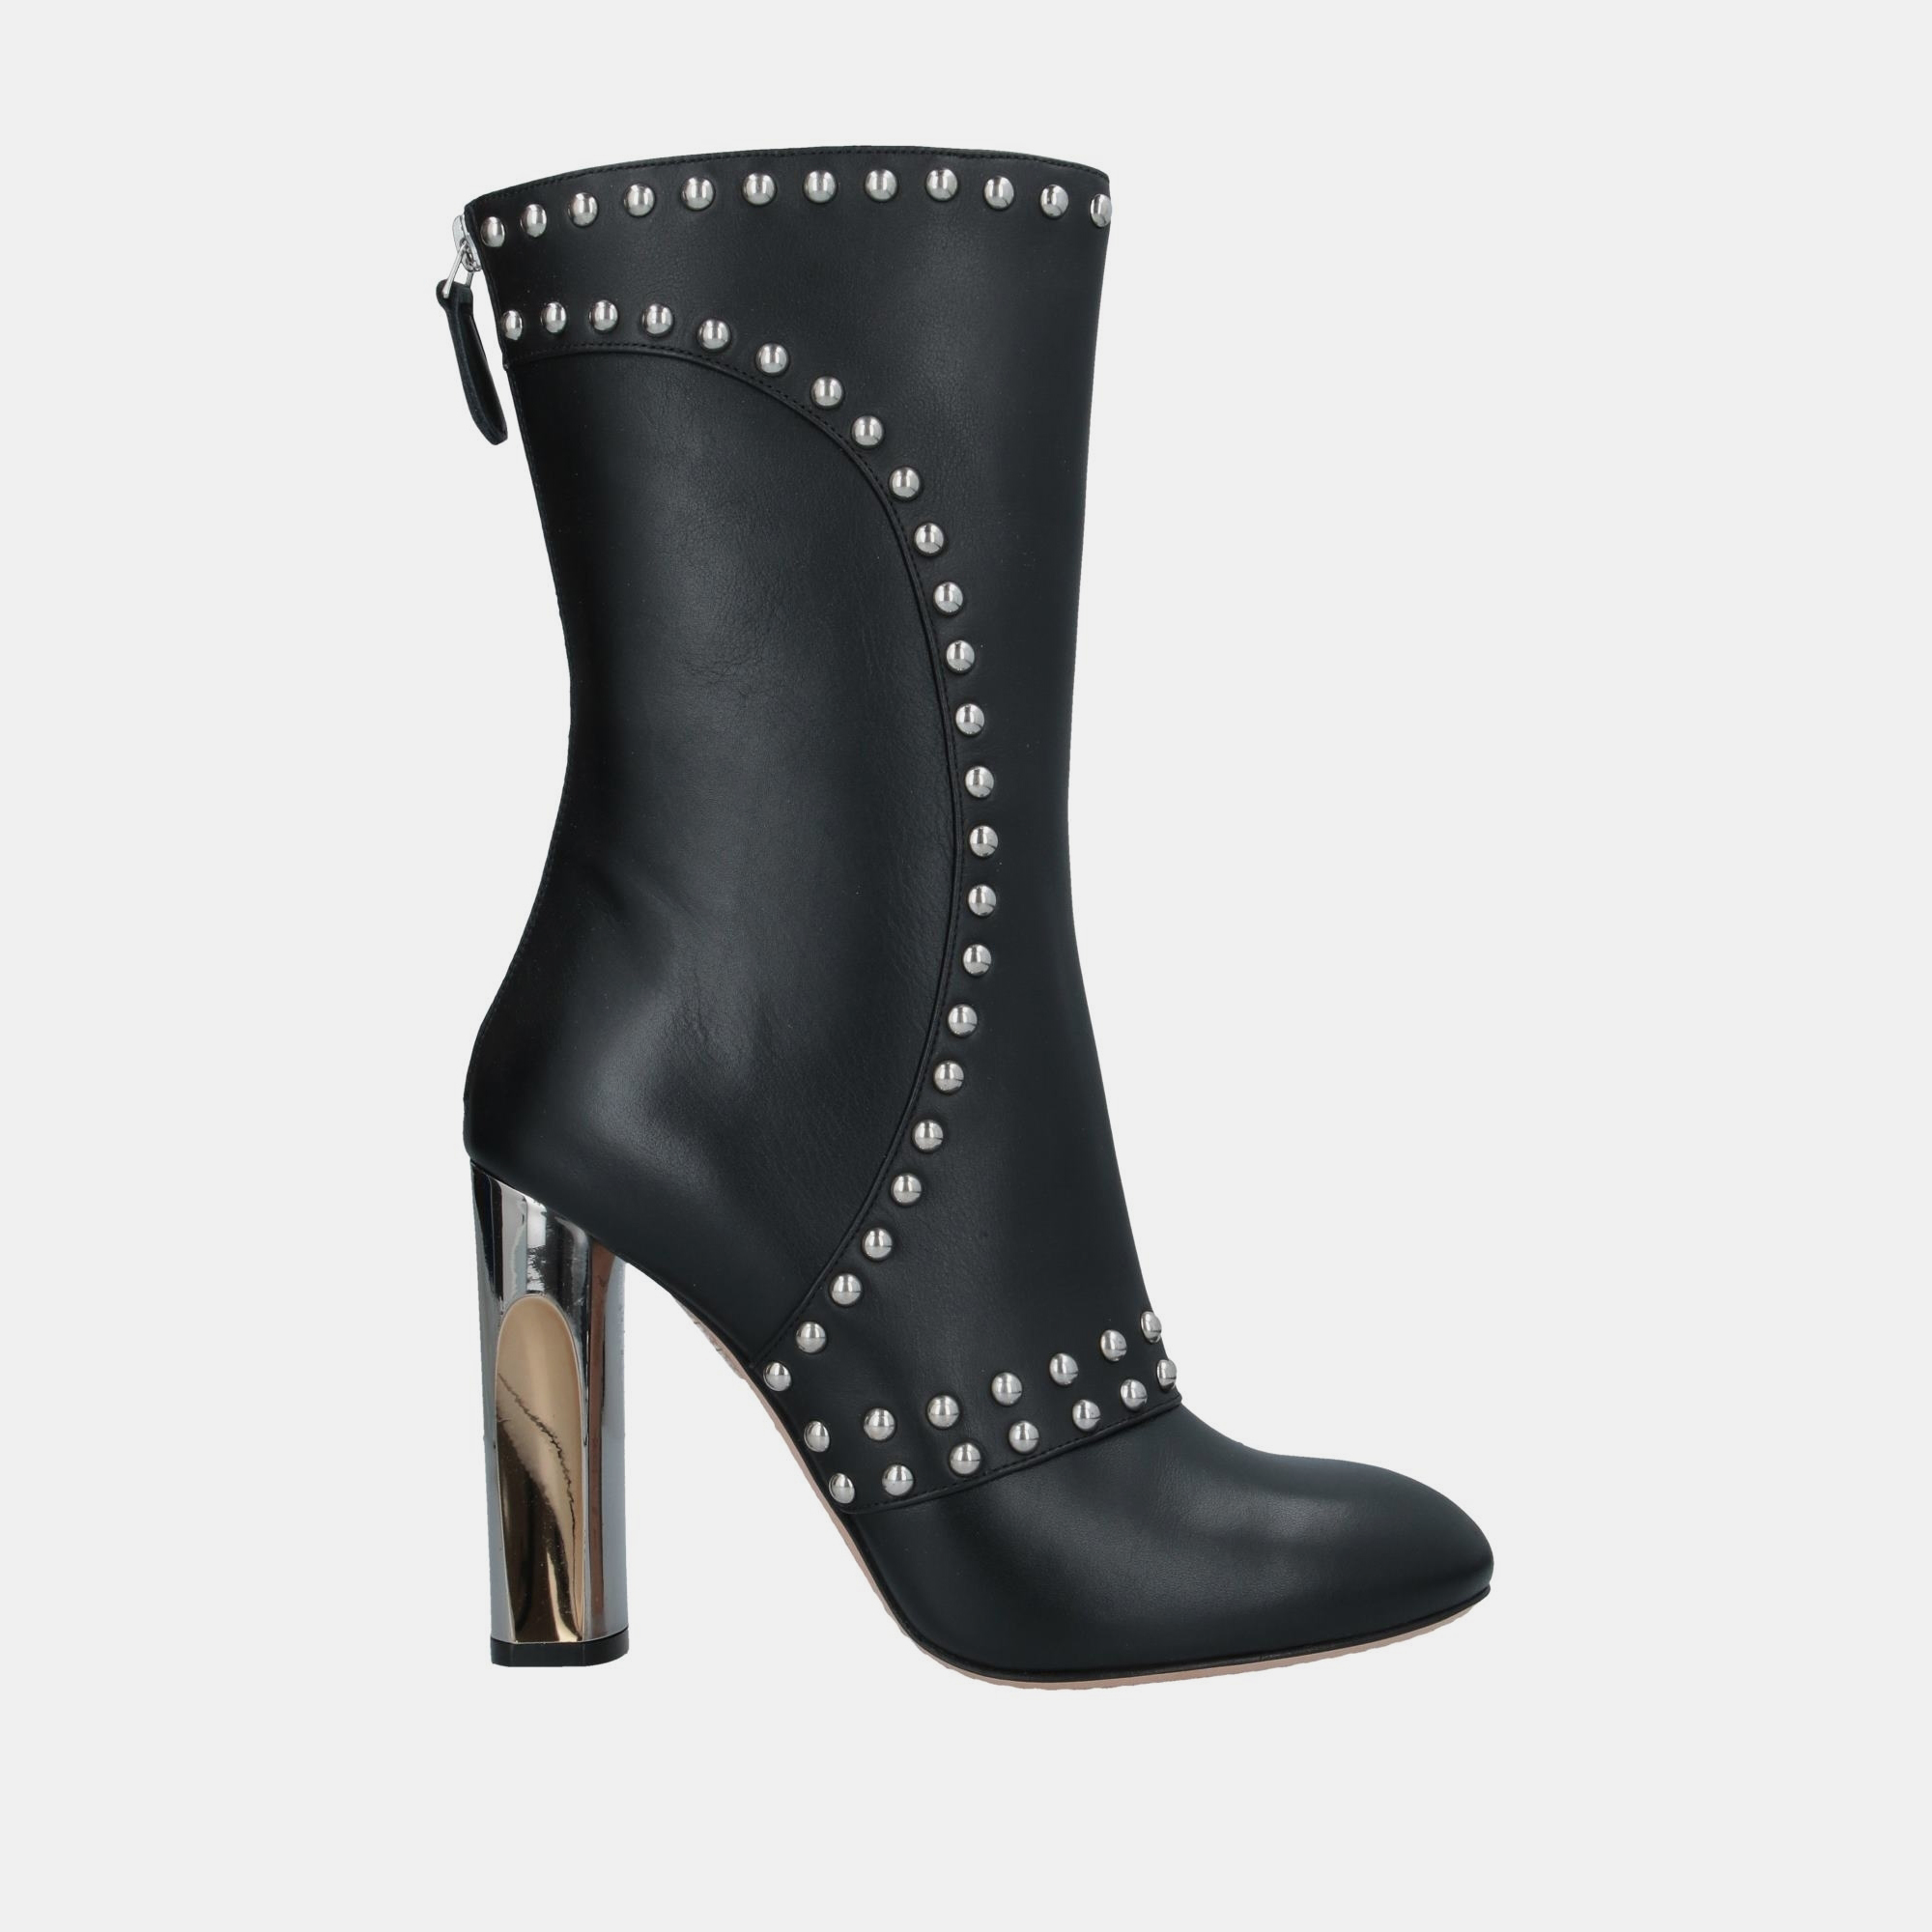 Alexander mcqueen leather ankle boots 38.5